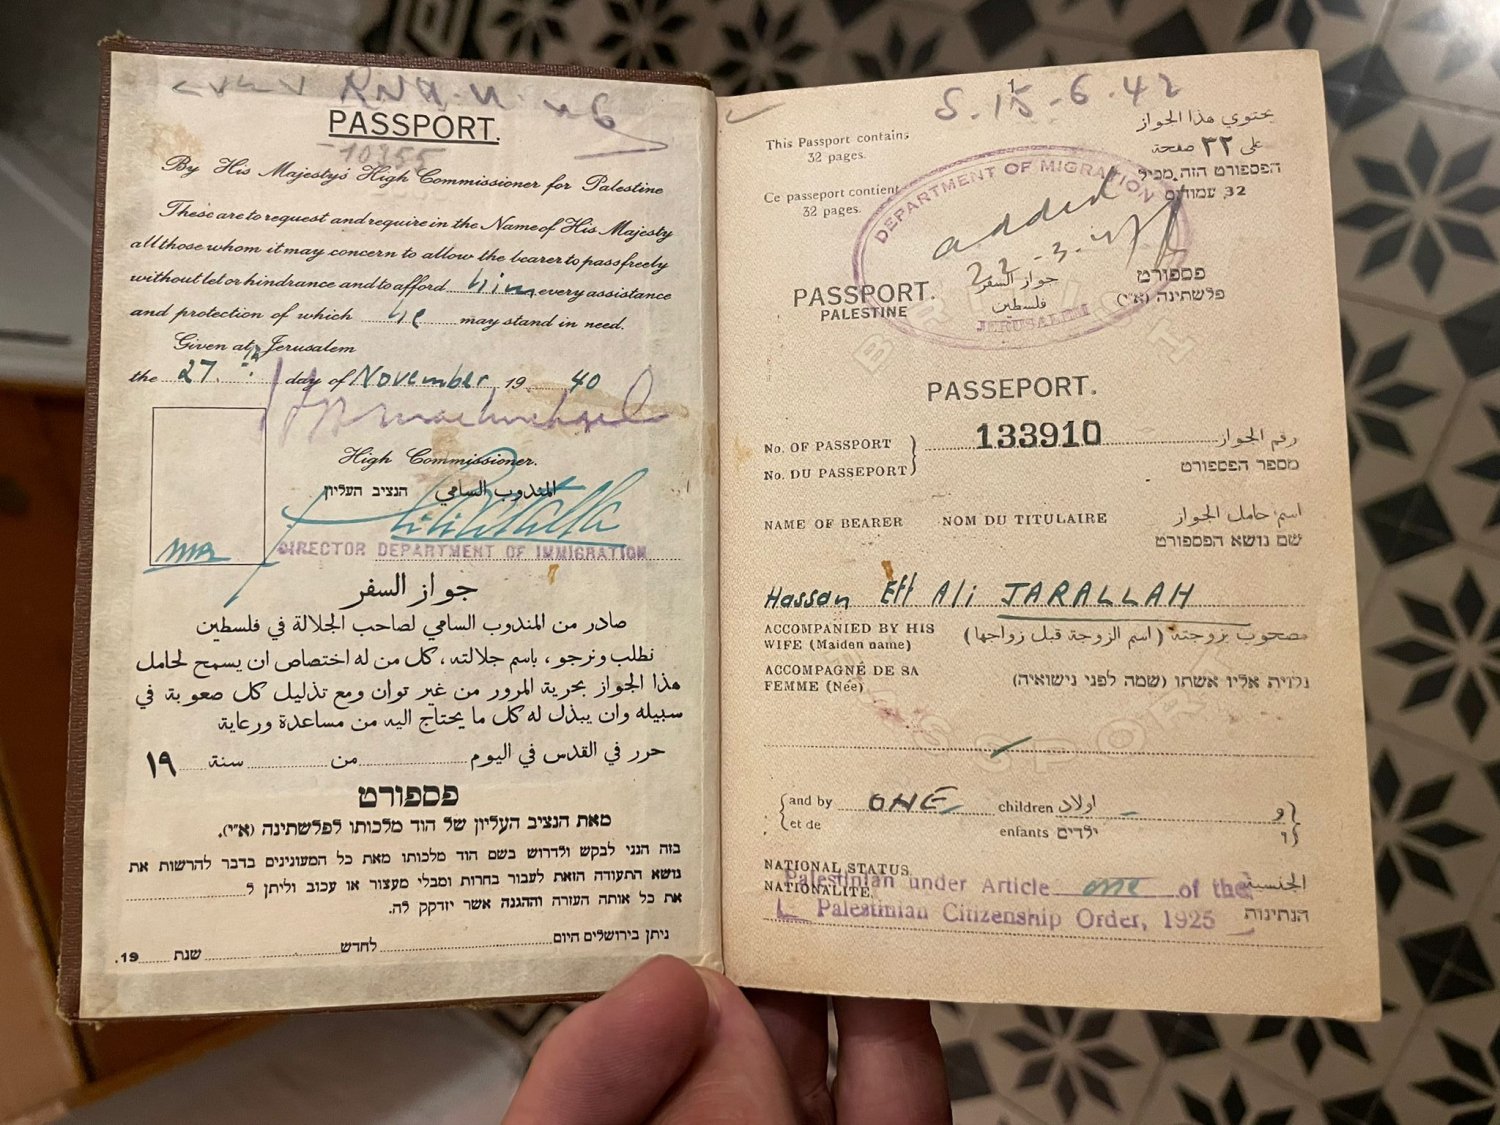 The inner pages of a Palestine passport belonging to Hassan Ali Jarallah of Jerusalem, from the Mandate era